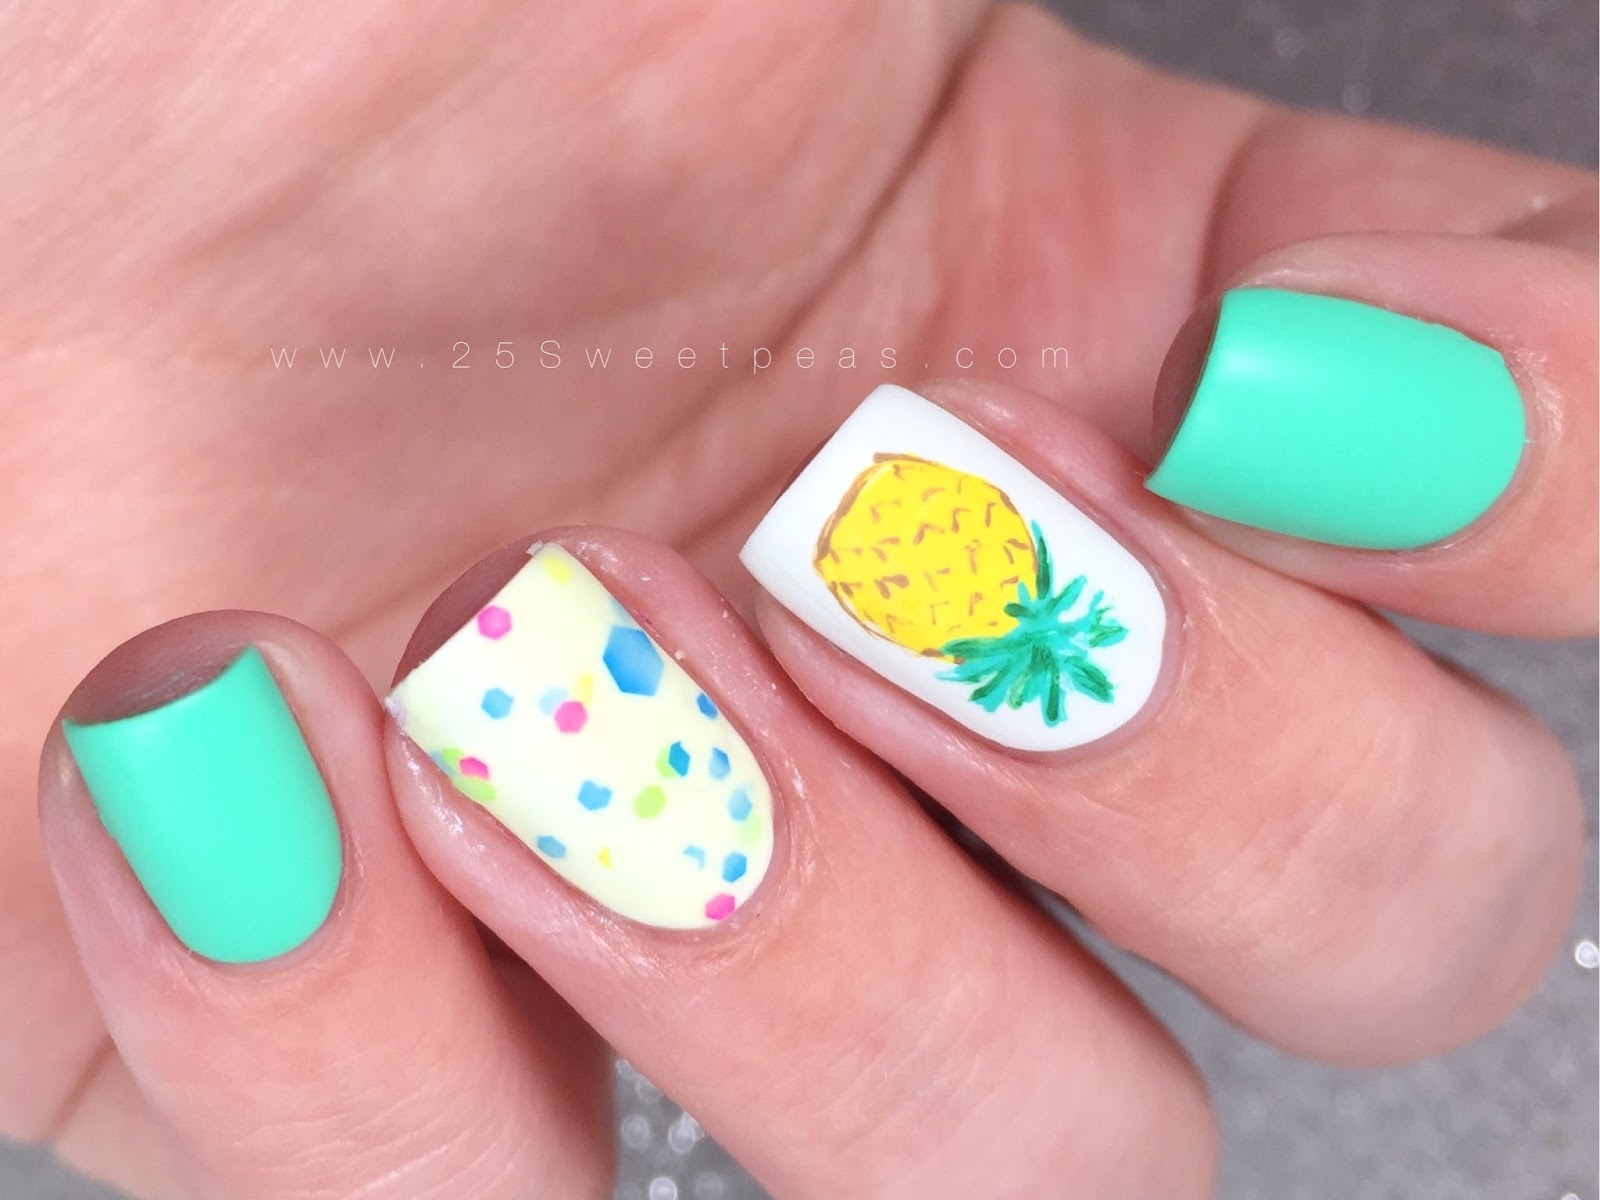 3. Pineapple Nail Art Decals - wide 5